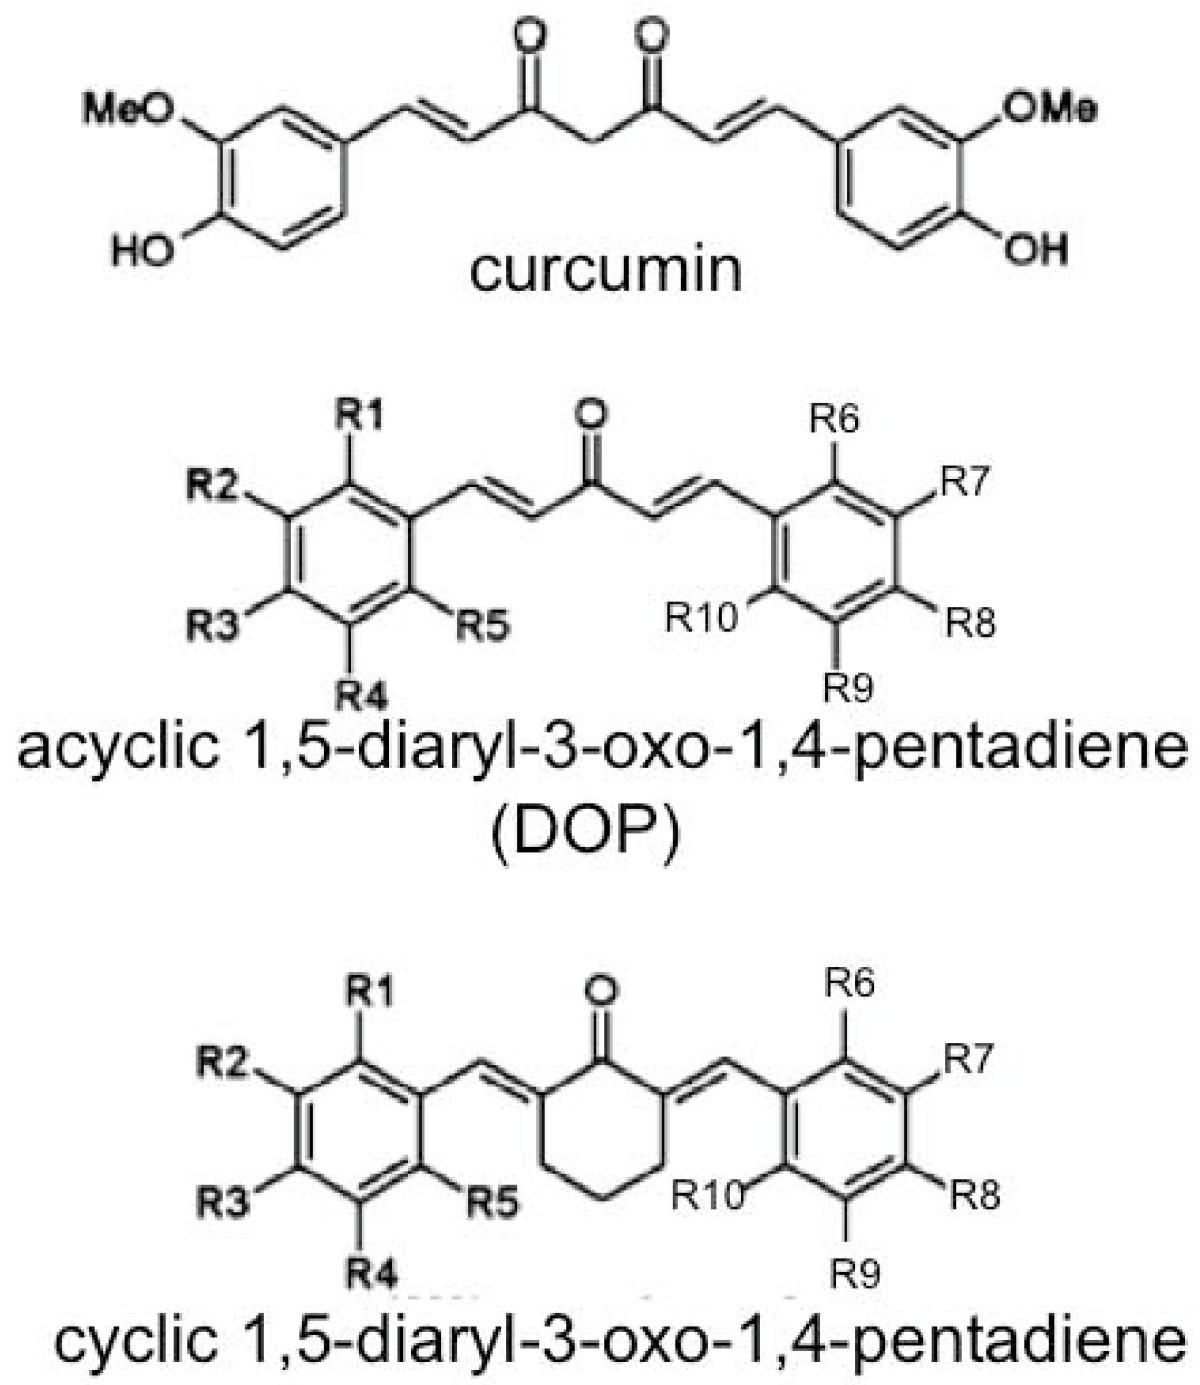 Synthesis of 86 species of 1,5-diaryl-3-oxo-1,4-pentadienes analogs of  curcumin can yield a good lead in vivo | BMC Pharmacology | Full Text